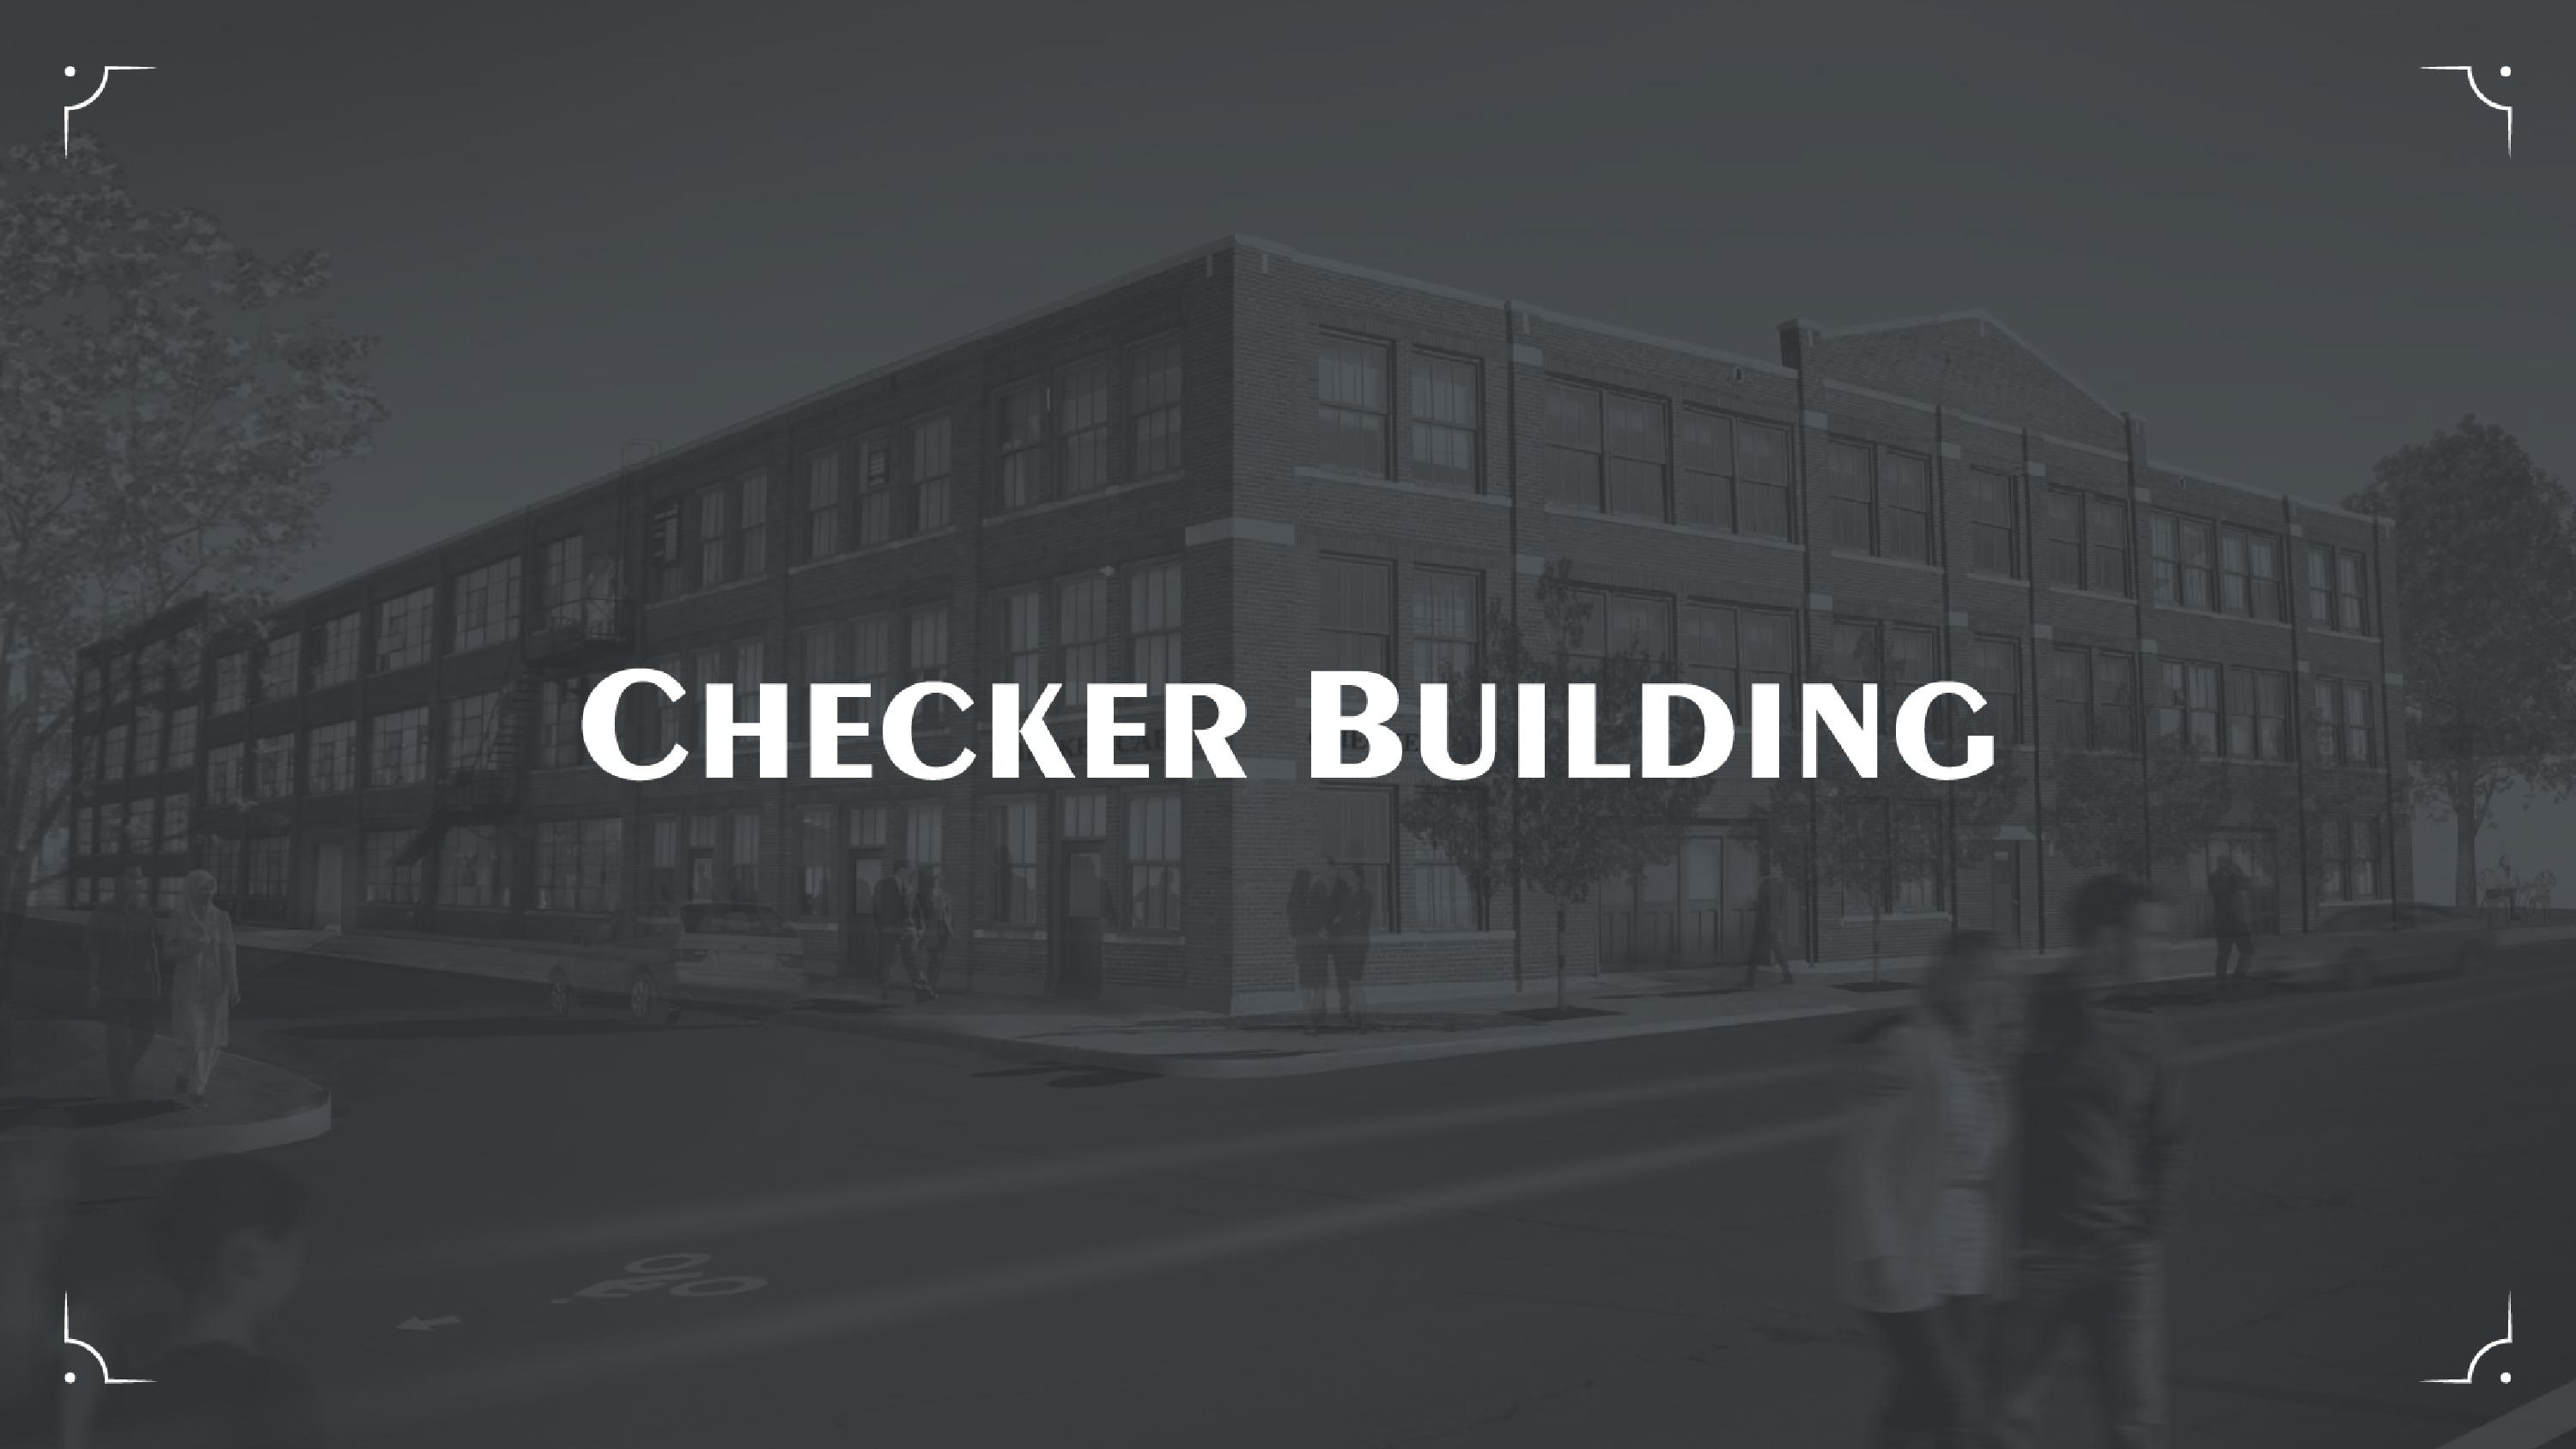 Checker Building wordmark against a stylized photo of the building